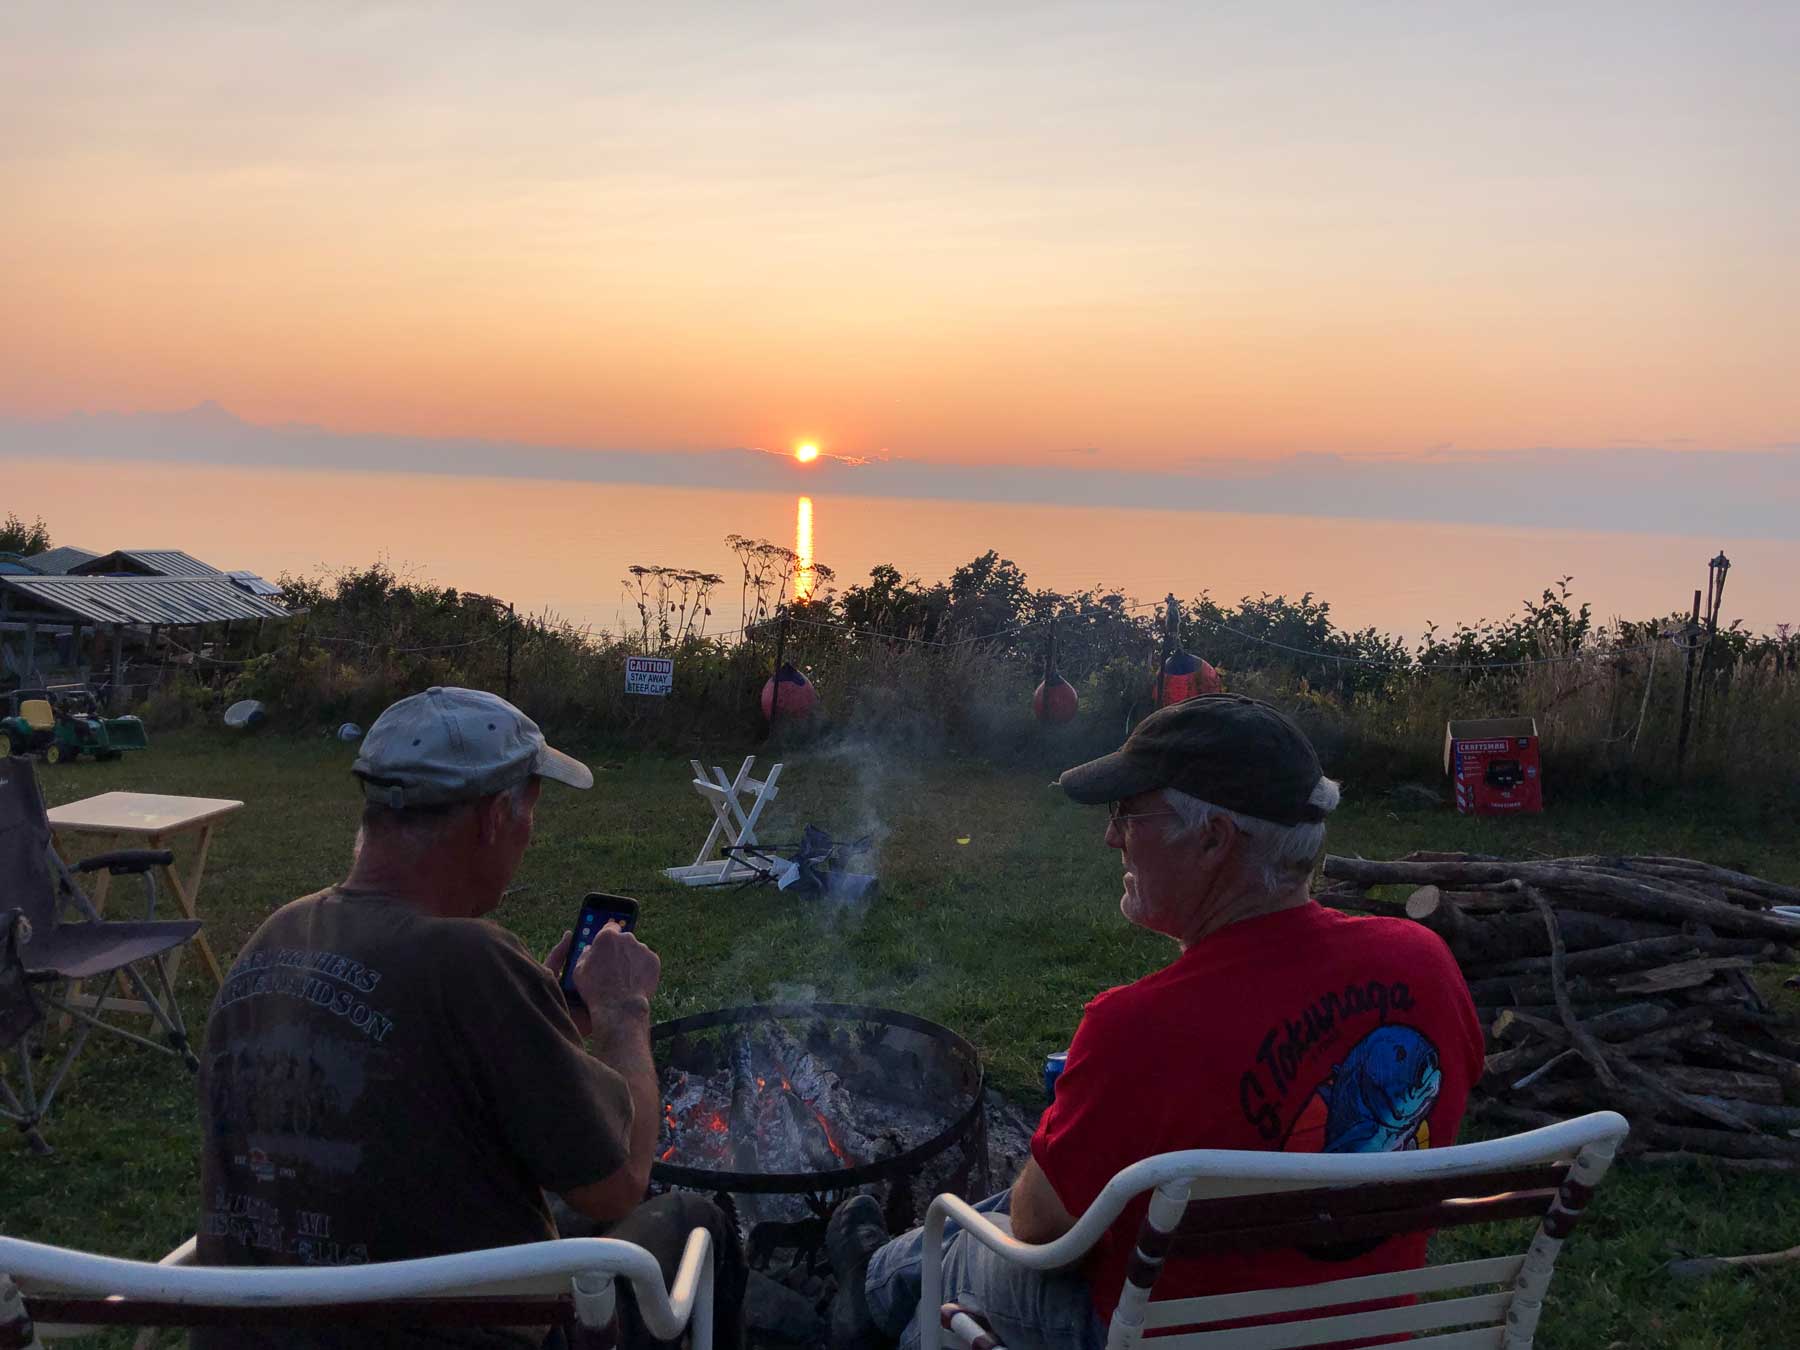 Two gents relaxing by the campfire at sunset